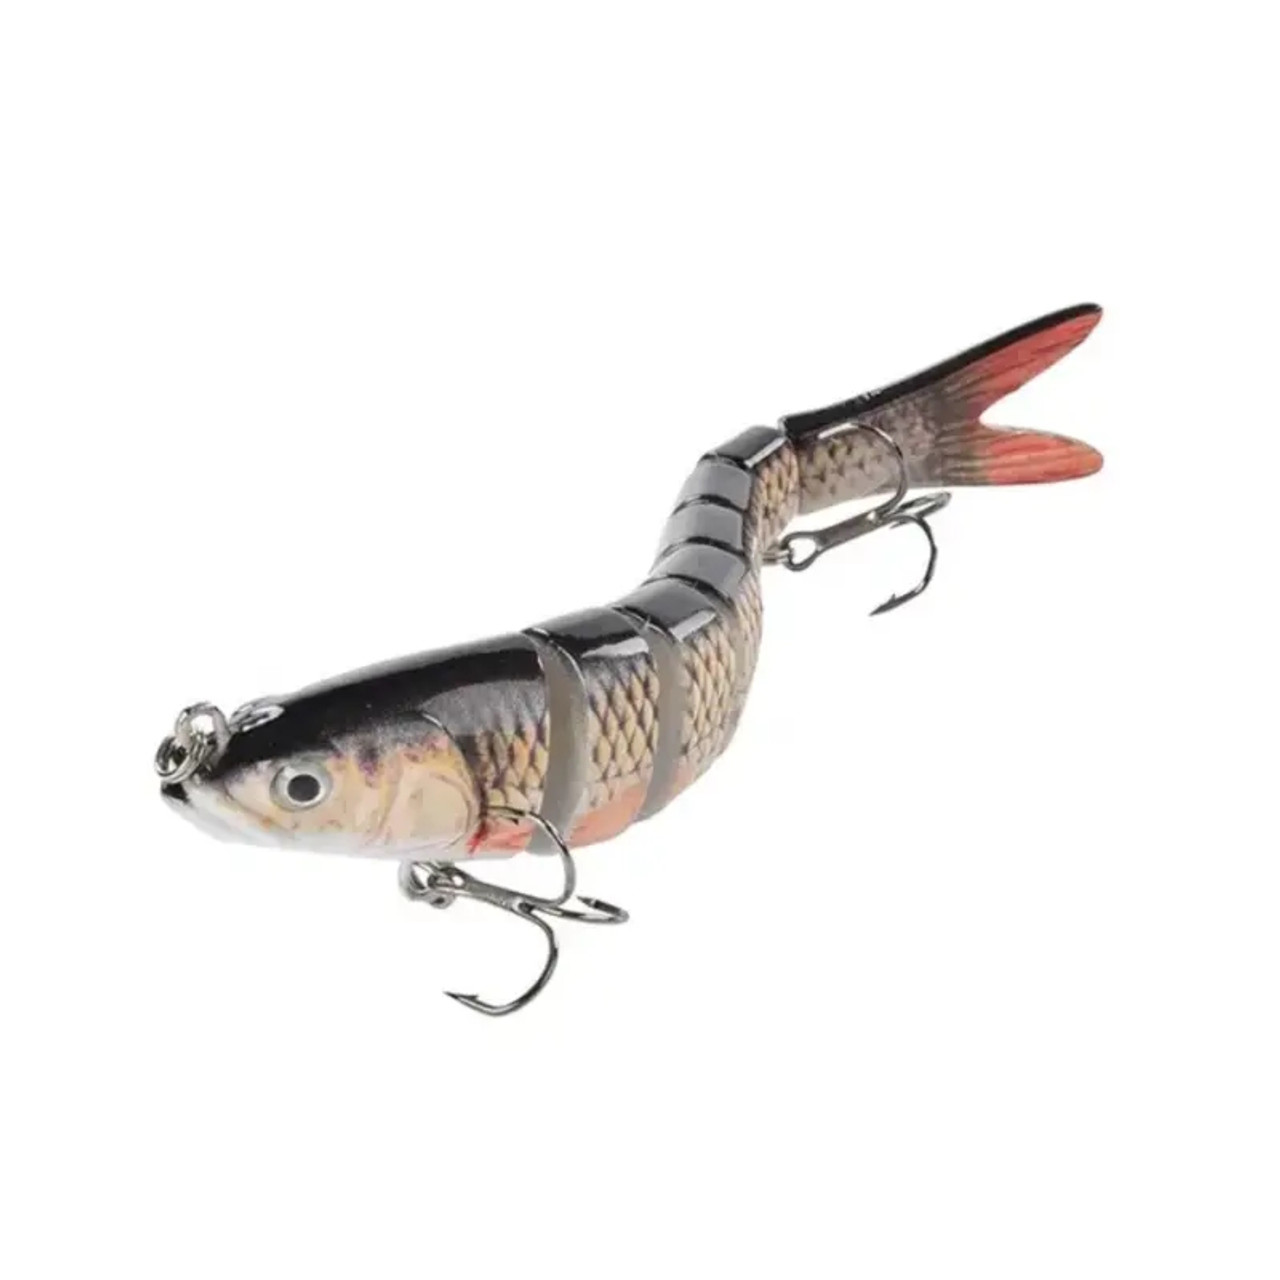 95mm 17g Trout Bionic Lifelike Artificial 7 Segment Multi Jointed Bass  Fishing Lure Kits Hard Swimbait with Box Package - China Fishing Lure and  Multi-Jointed Bait price